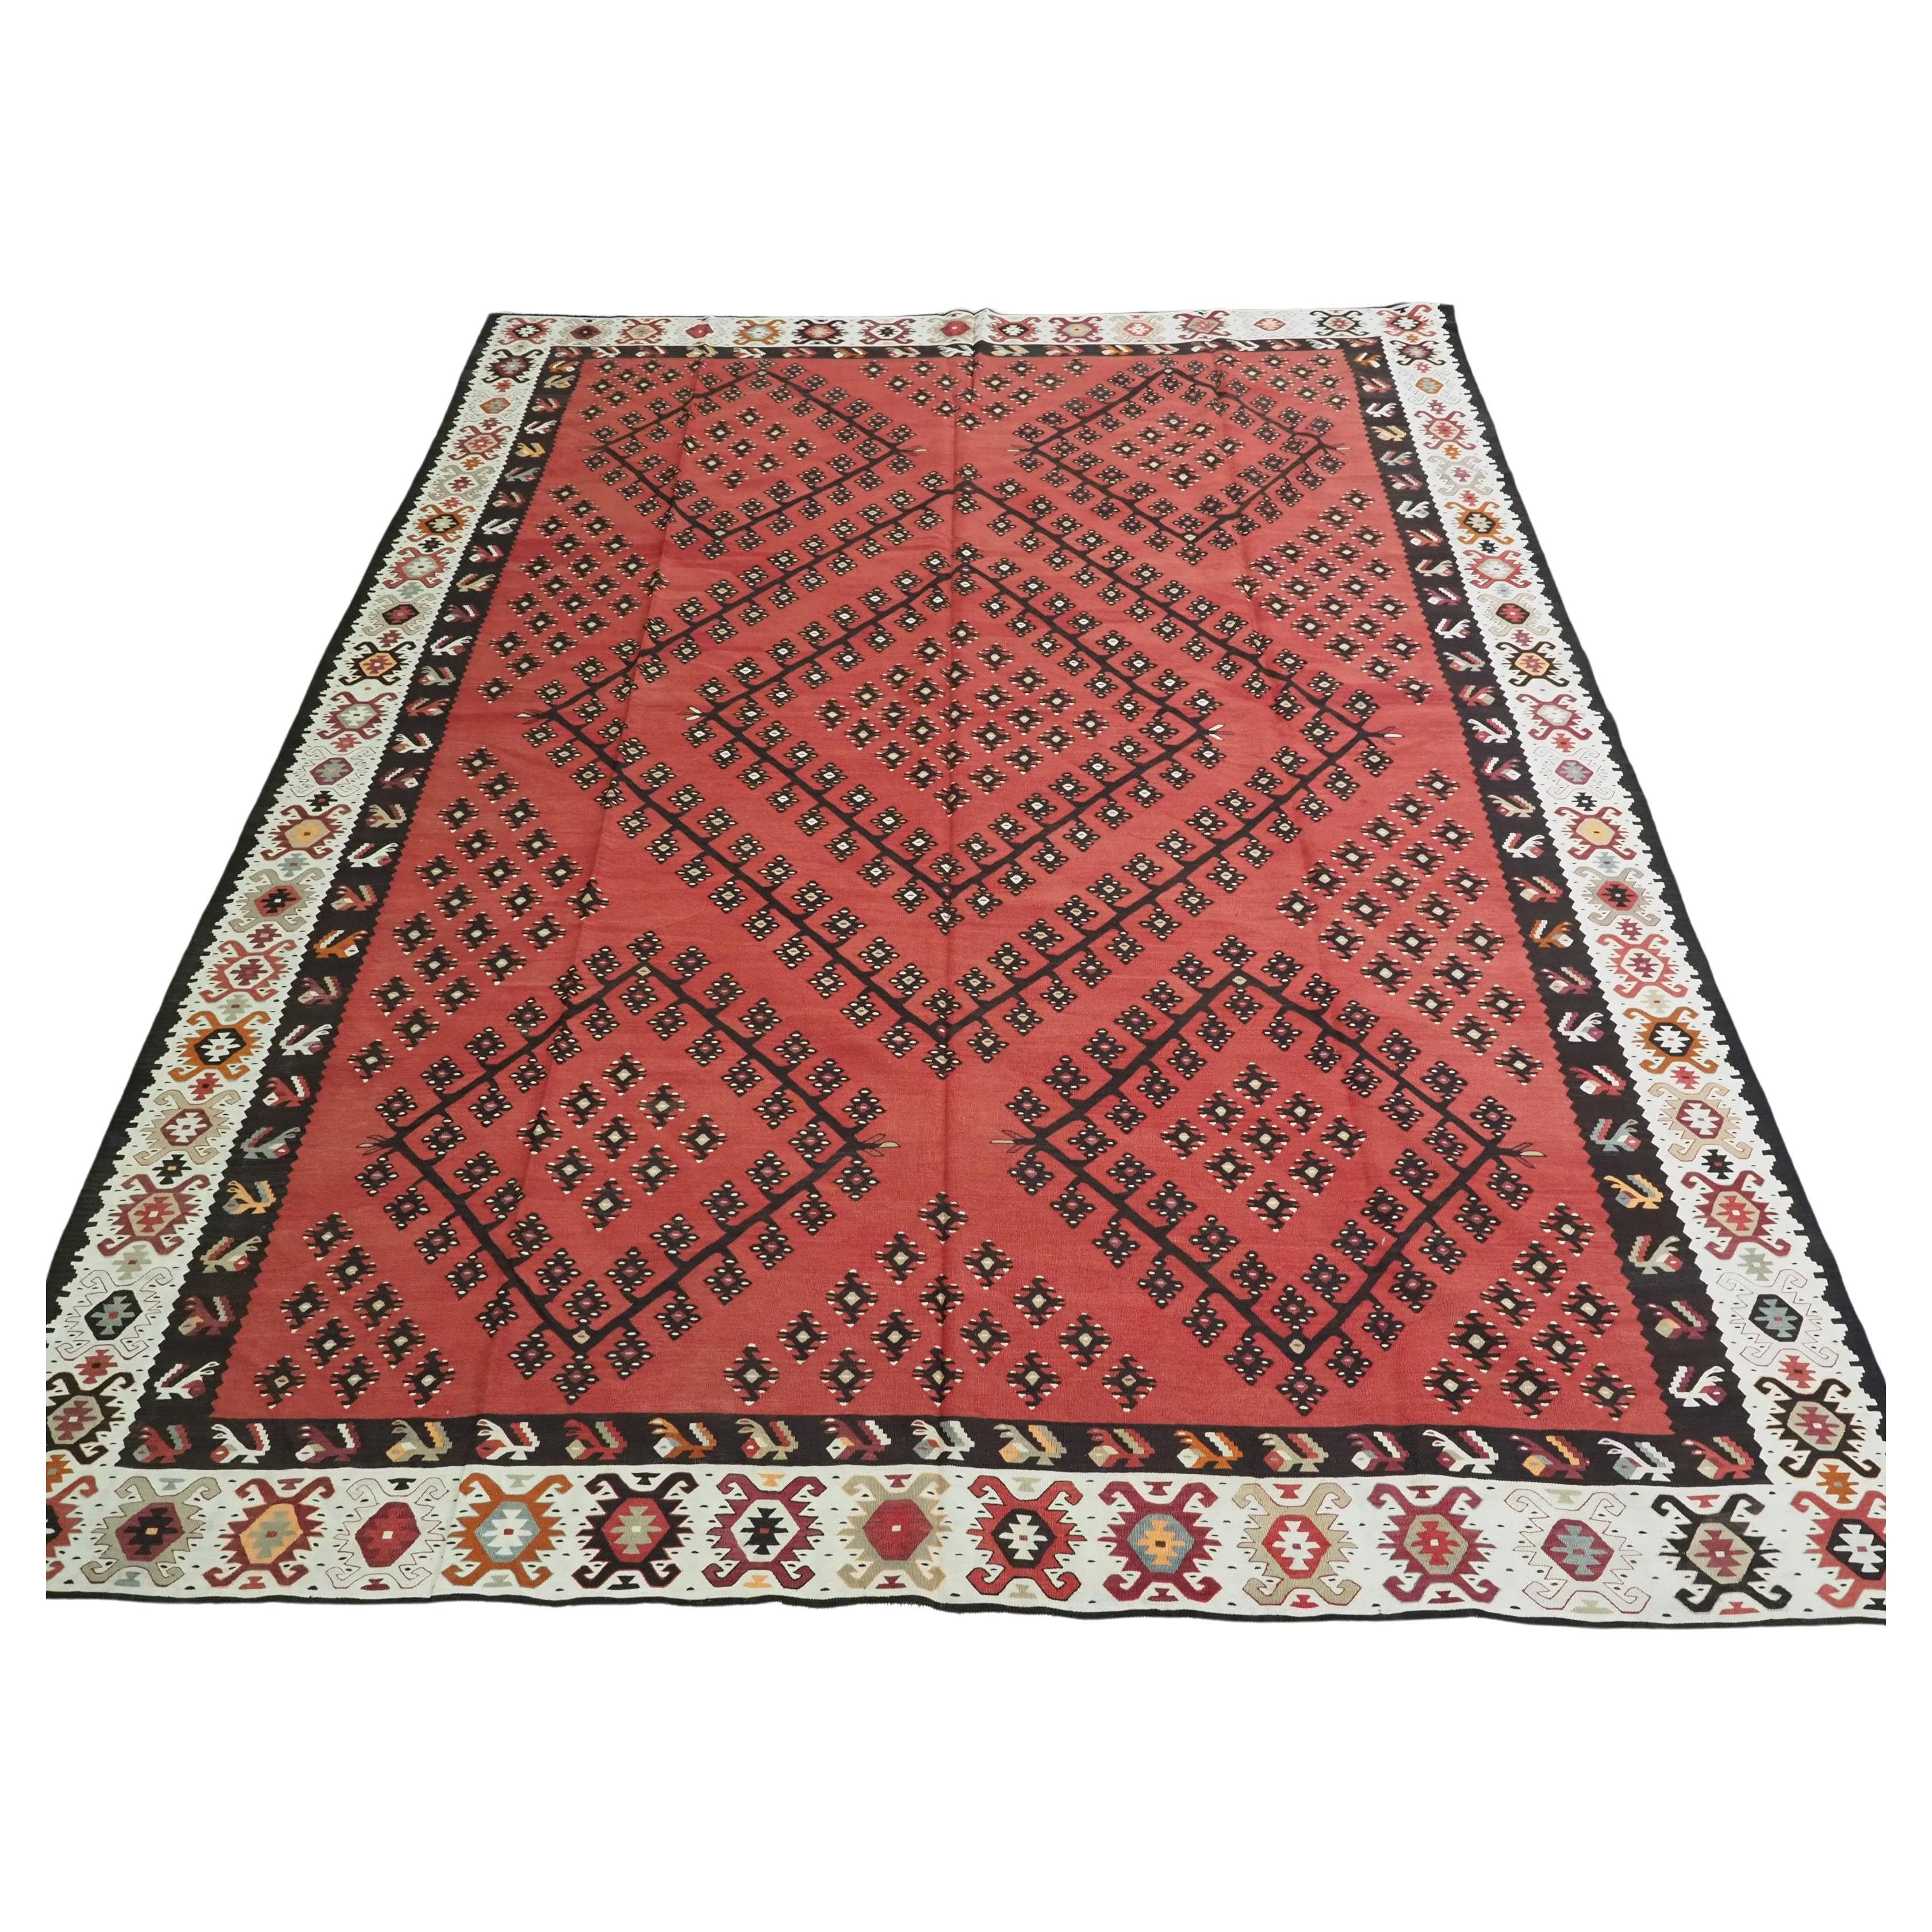 Antique Pirot/ Sarkoy kilim of traditional design & large room size, circa 1920. For Sale